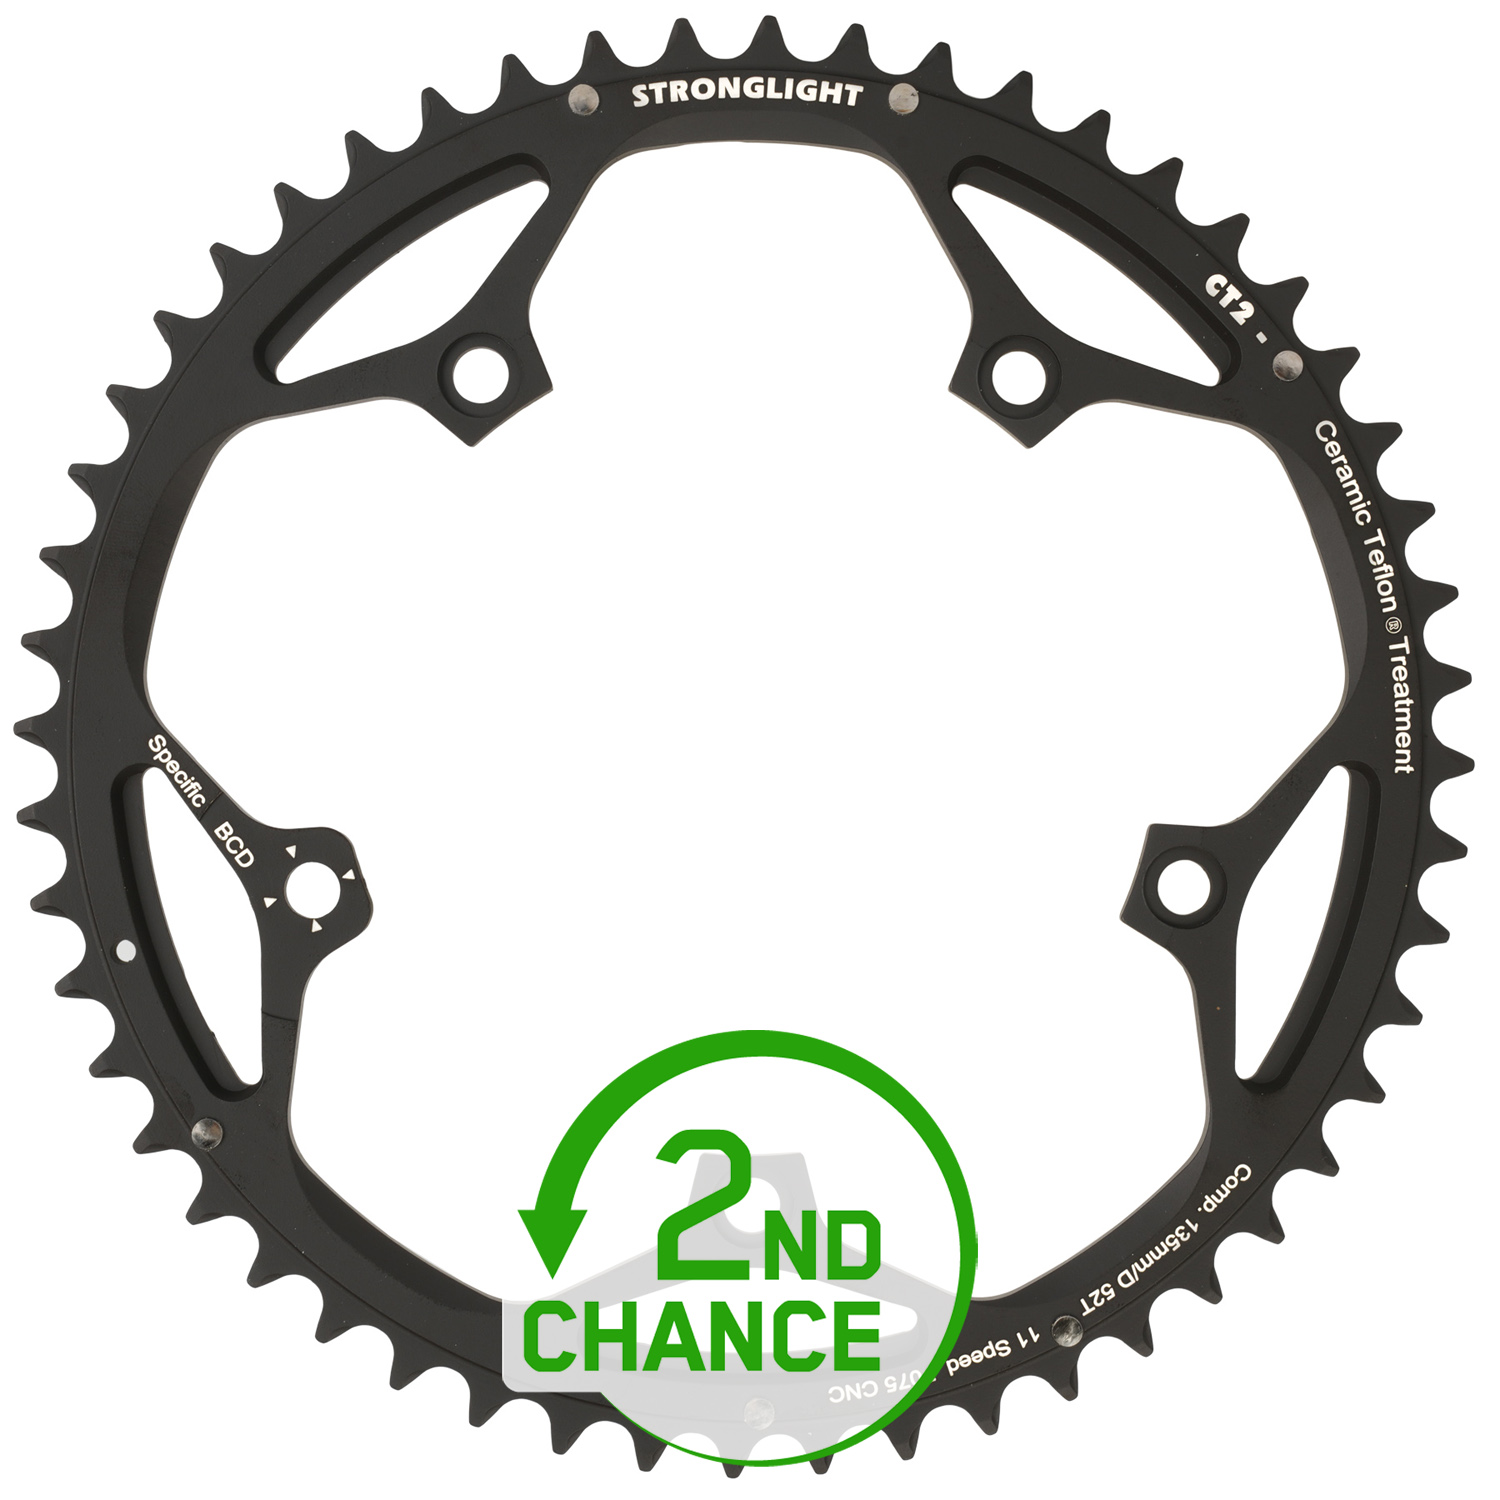 Image of Stronglight CT2 Road Chainring - 5-Arm - 135mm - Campagnolo 11-Speed - Type D - black - 2nd Choice